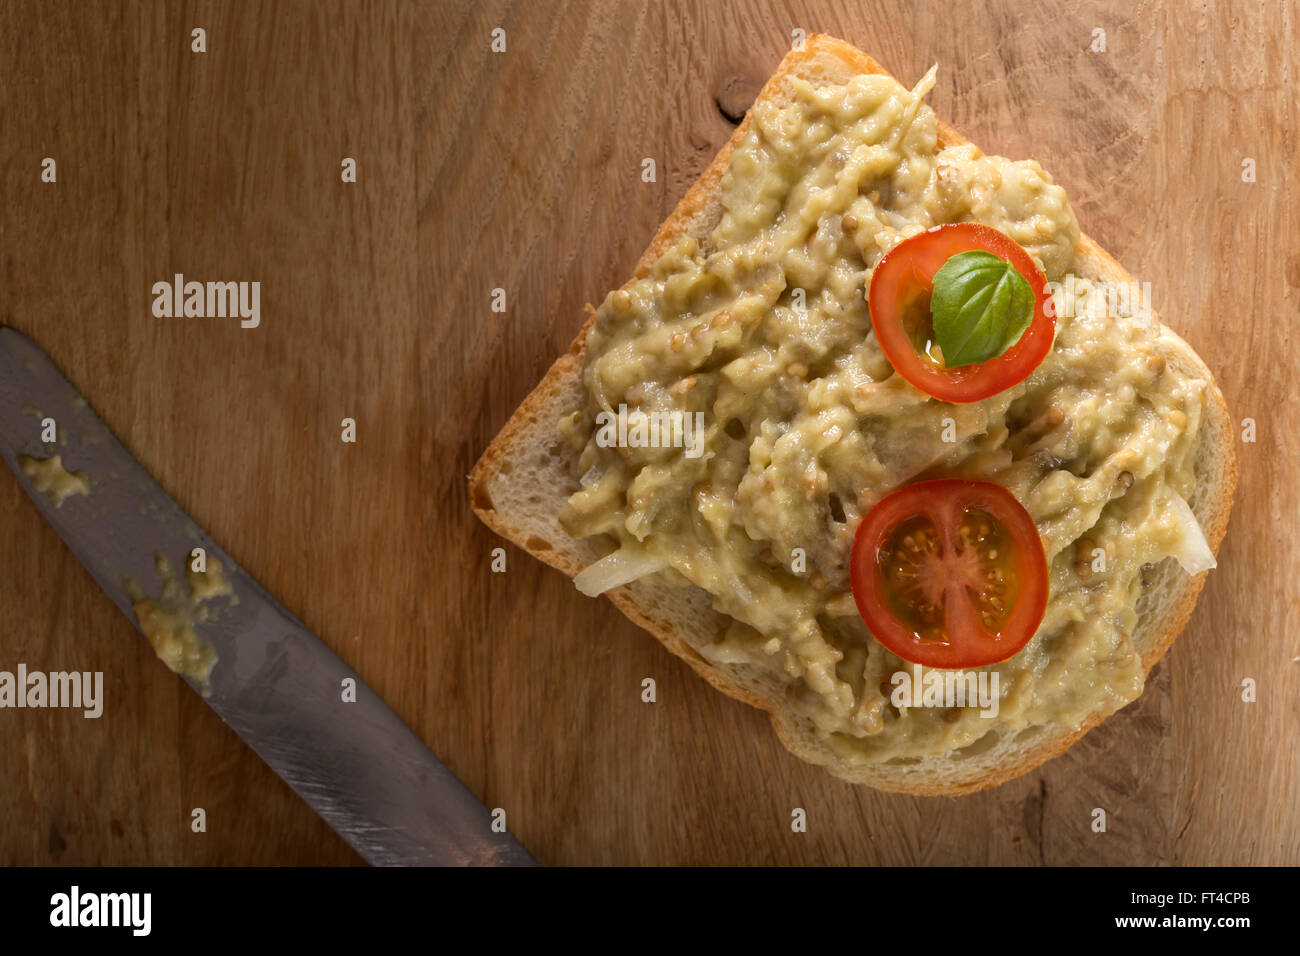 Slice of bread smeared with eggplant salad Stock Photo